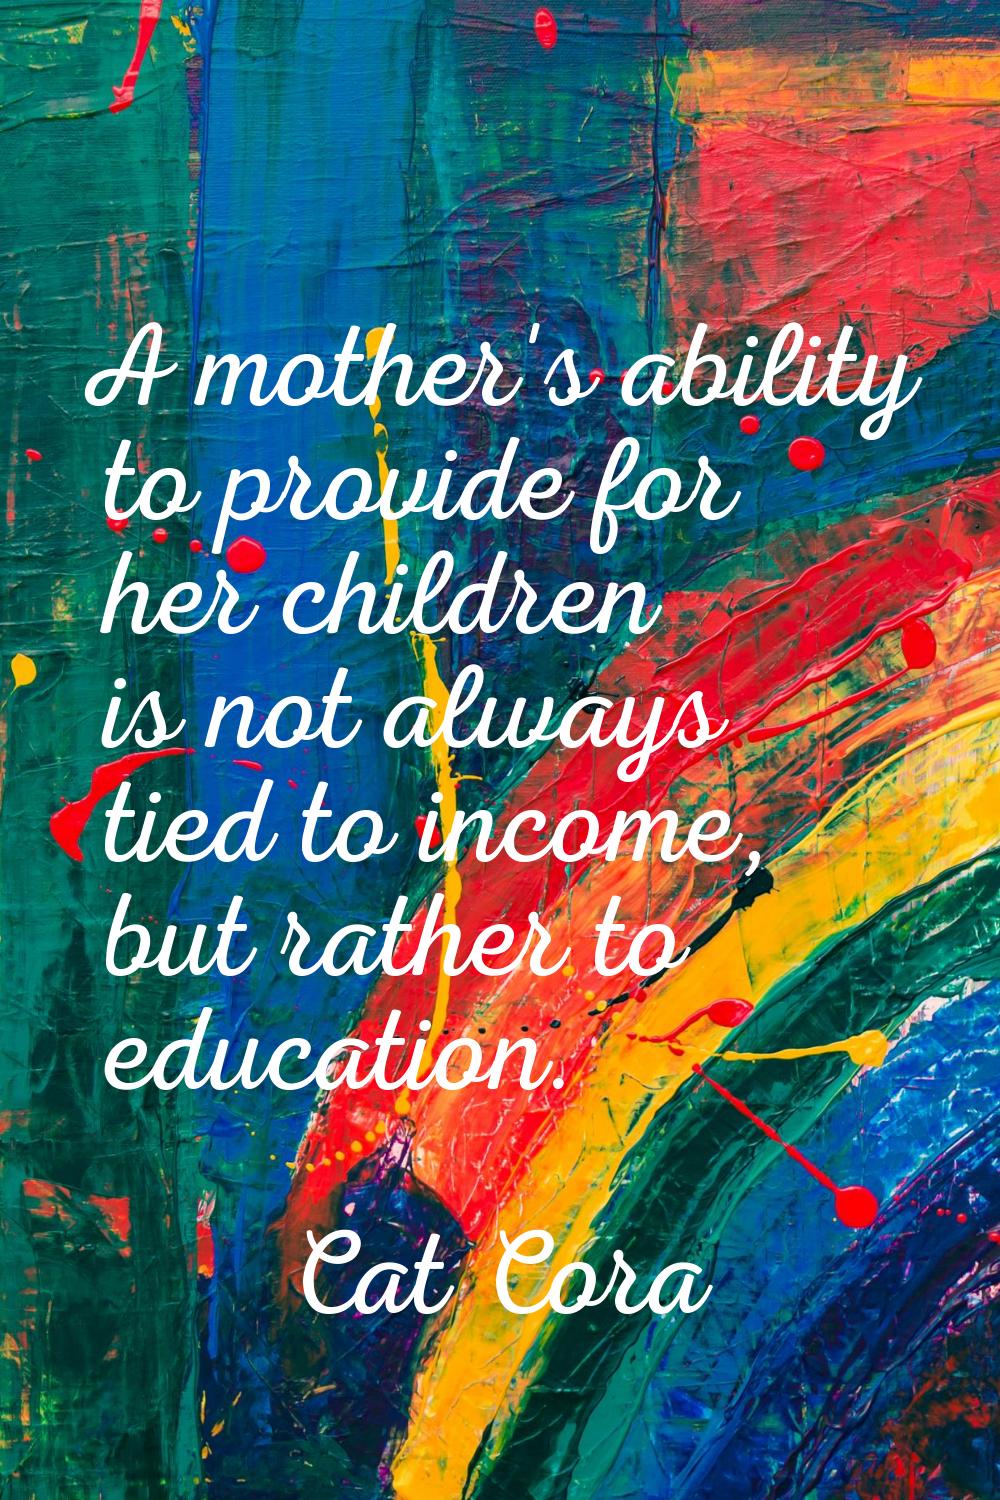 A mother's ability to provide for her children is not always tied to income, but rather to educatio